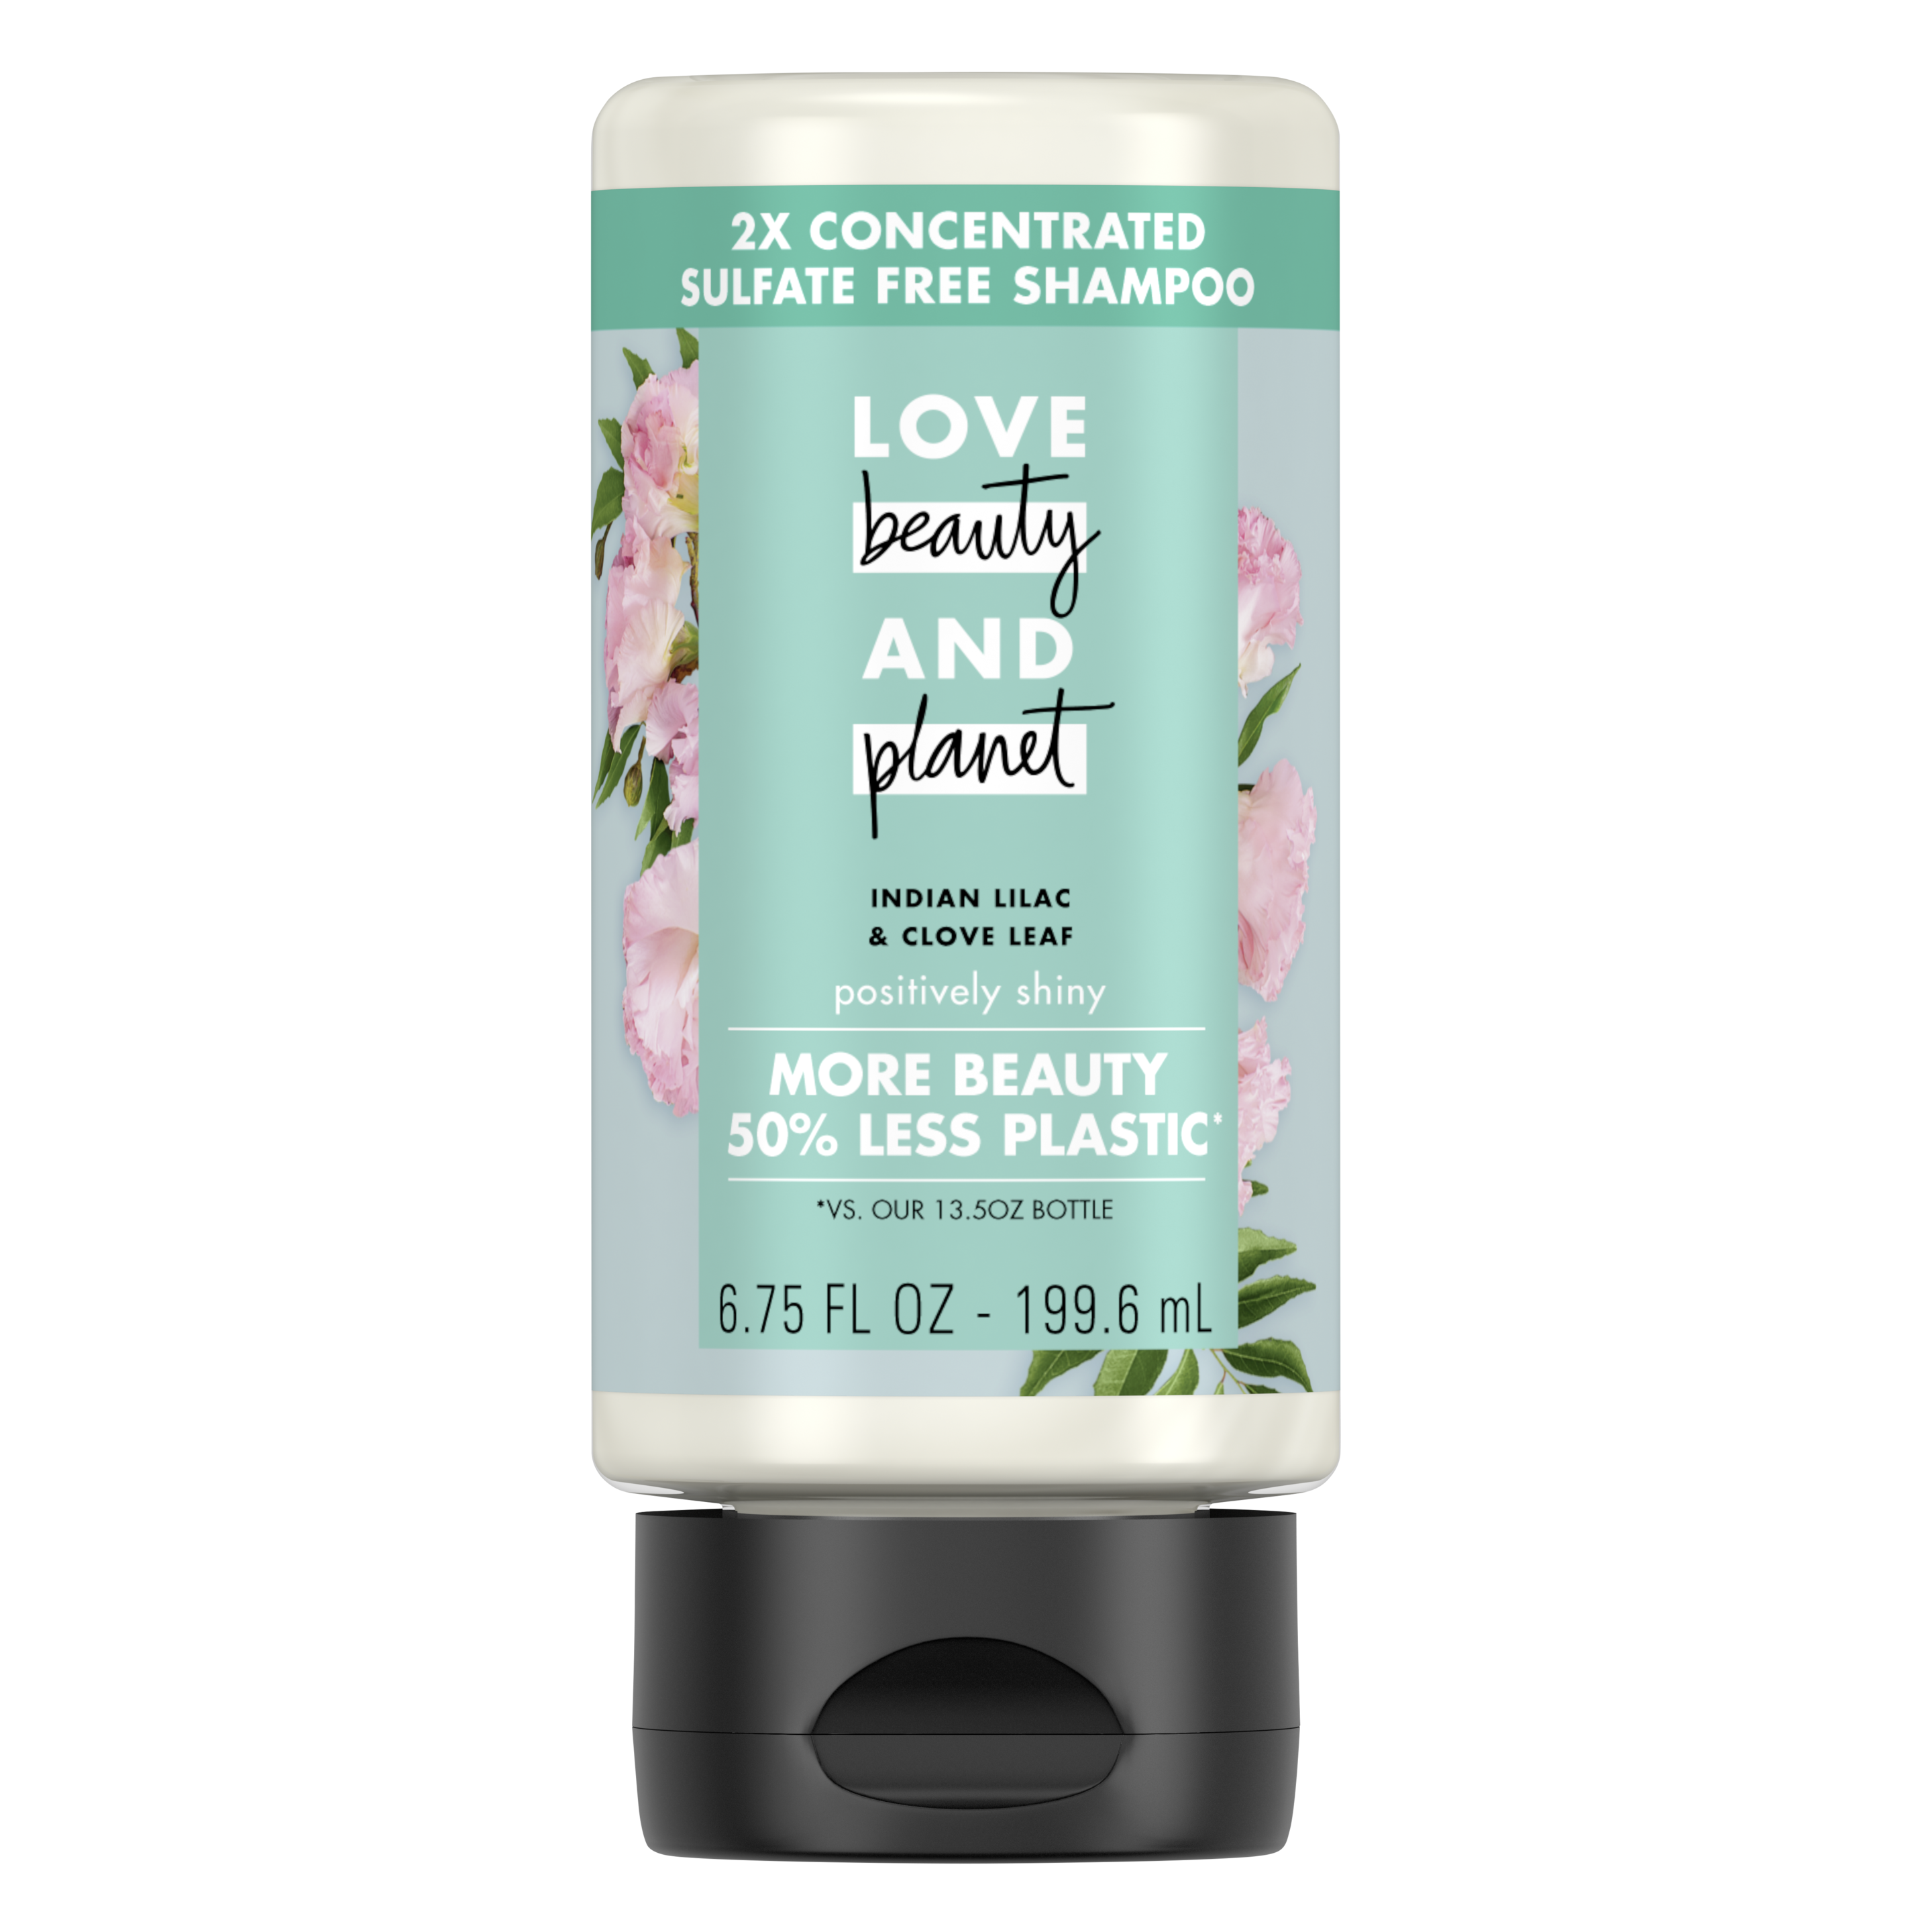 sulfate-free indian lilac & clove leaf 2X concentrated shampoo